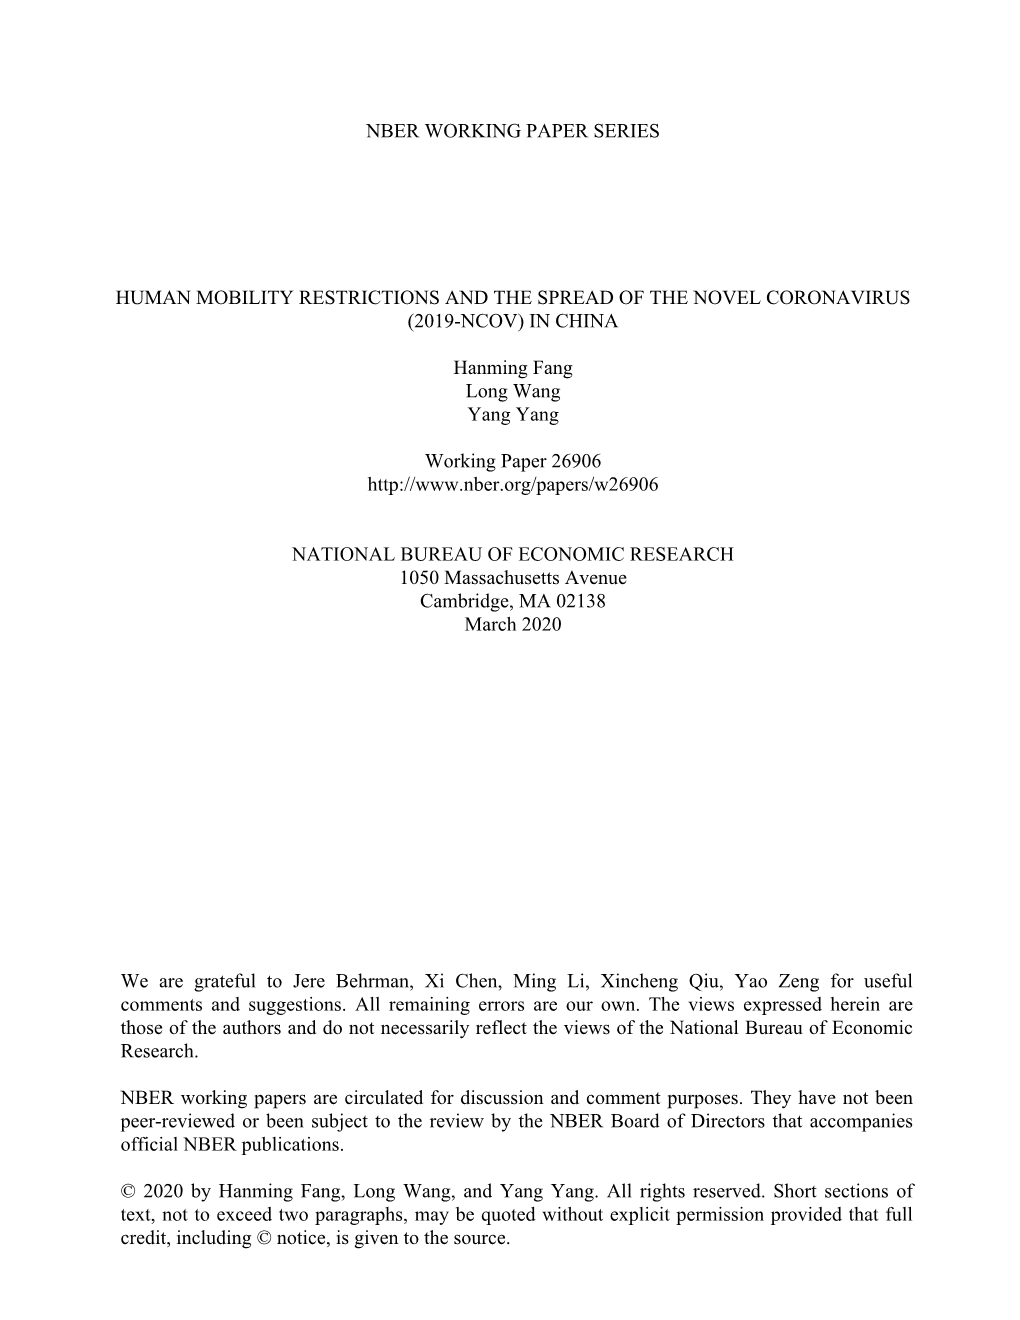 NBER WORKING PAPER SERIES HUMAN MOBILITY RESTRICTIONS and the SPREAD of the NOVEL CORONAVIRUS (2019-NCOV) in CHINA Hanming Fang